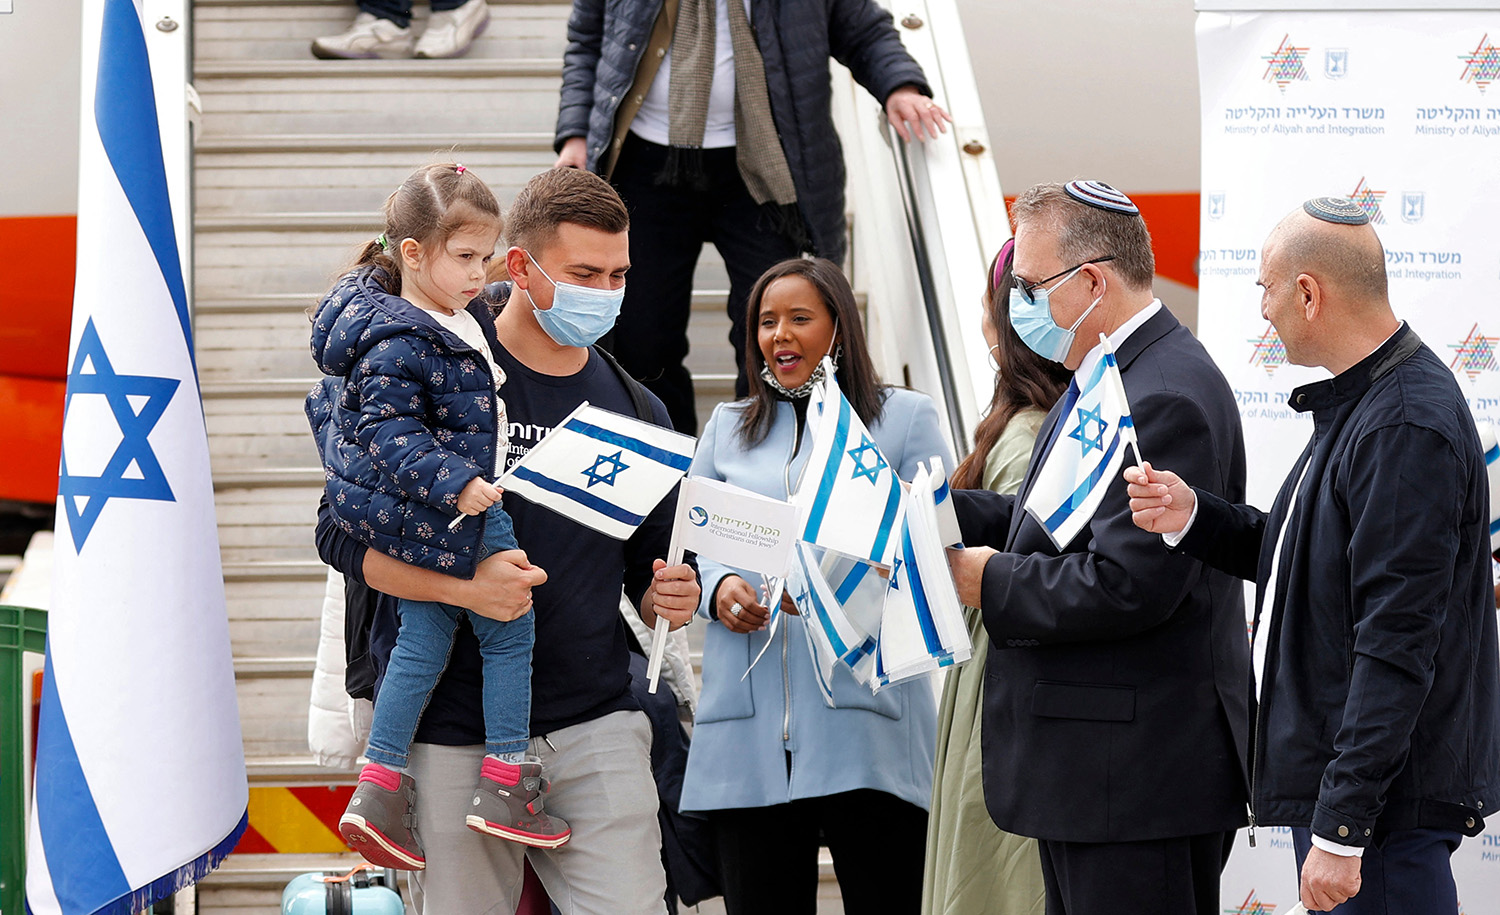 
Pnina Tamano-Shata, Israel&#8217;s Minister of Immigration and Absorption, and Yaakov Hagoel, head of the World Zionist Organization, hand out Israeli flags to immigrants from Ukraine at Ben-Gurion Airport in Lod on February 20, 2022. JACK GUEZ / AFP) (Photo by JACK GUEZ/AFP via Getty Images.






